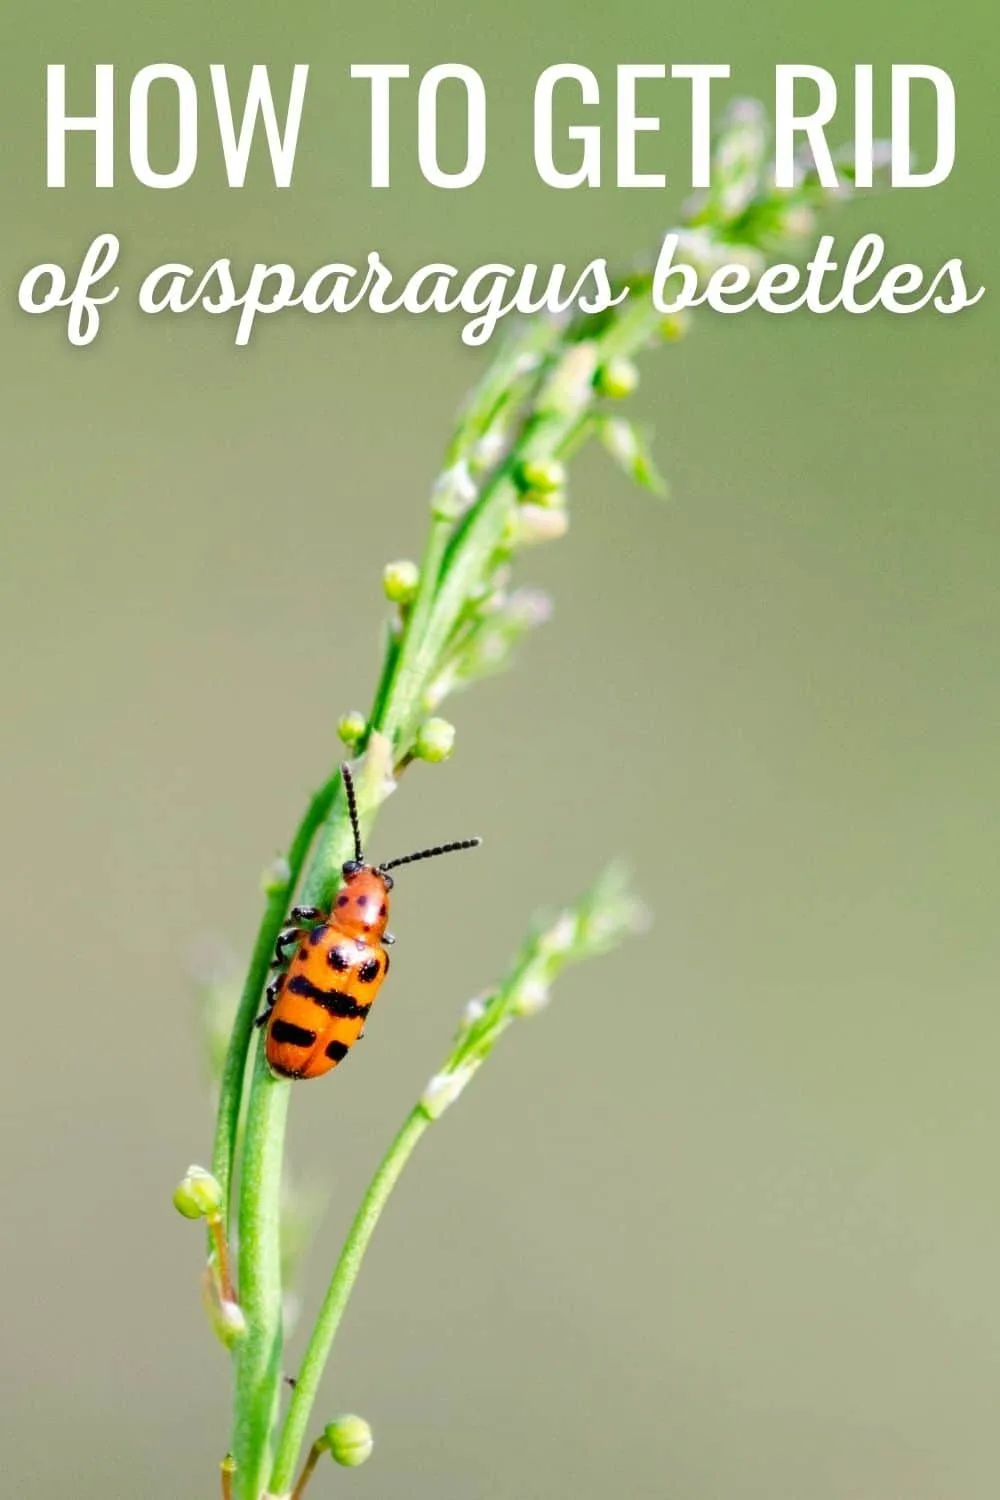 How to get rid of asparagus beetles